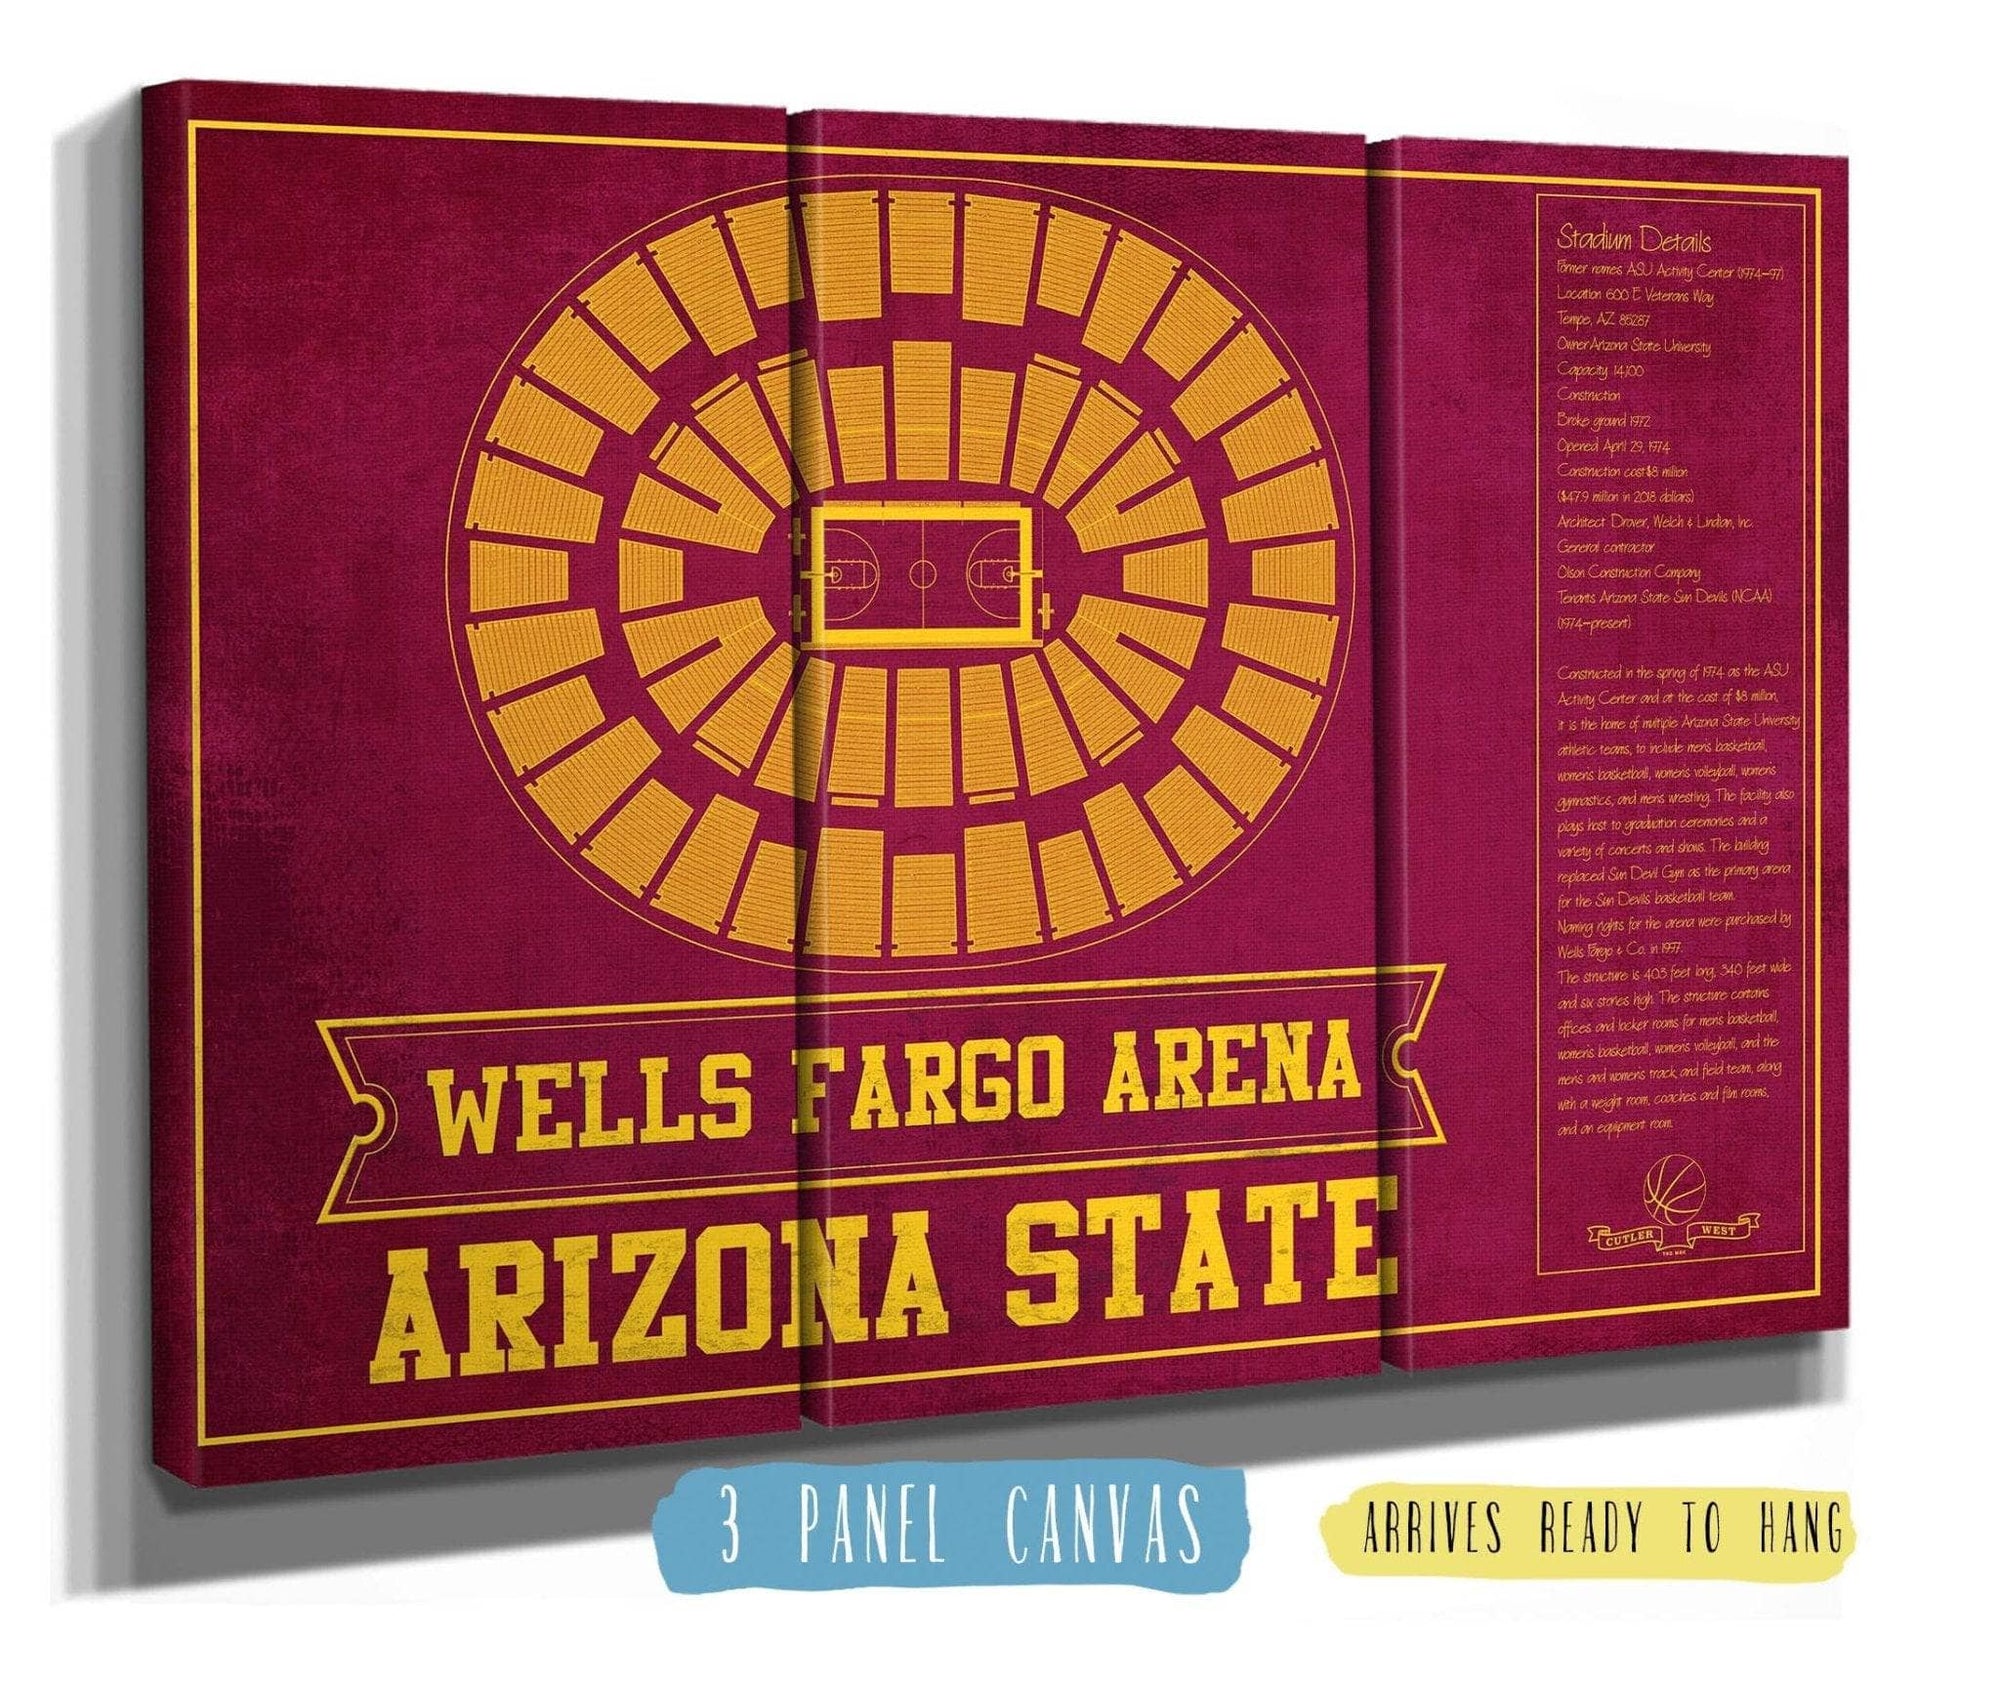 Cutler West Basketball Collection 48" x 32" / 3 Panel Canvas Wrap Arizona State University Wells Fargo Arena Teamcolor Seating Chart 933350228_82618